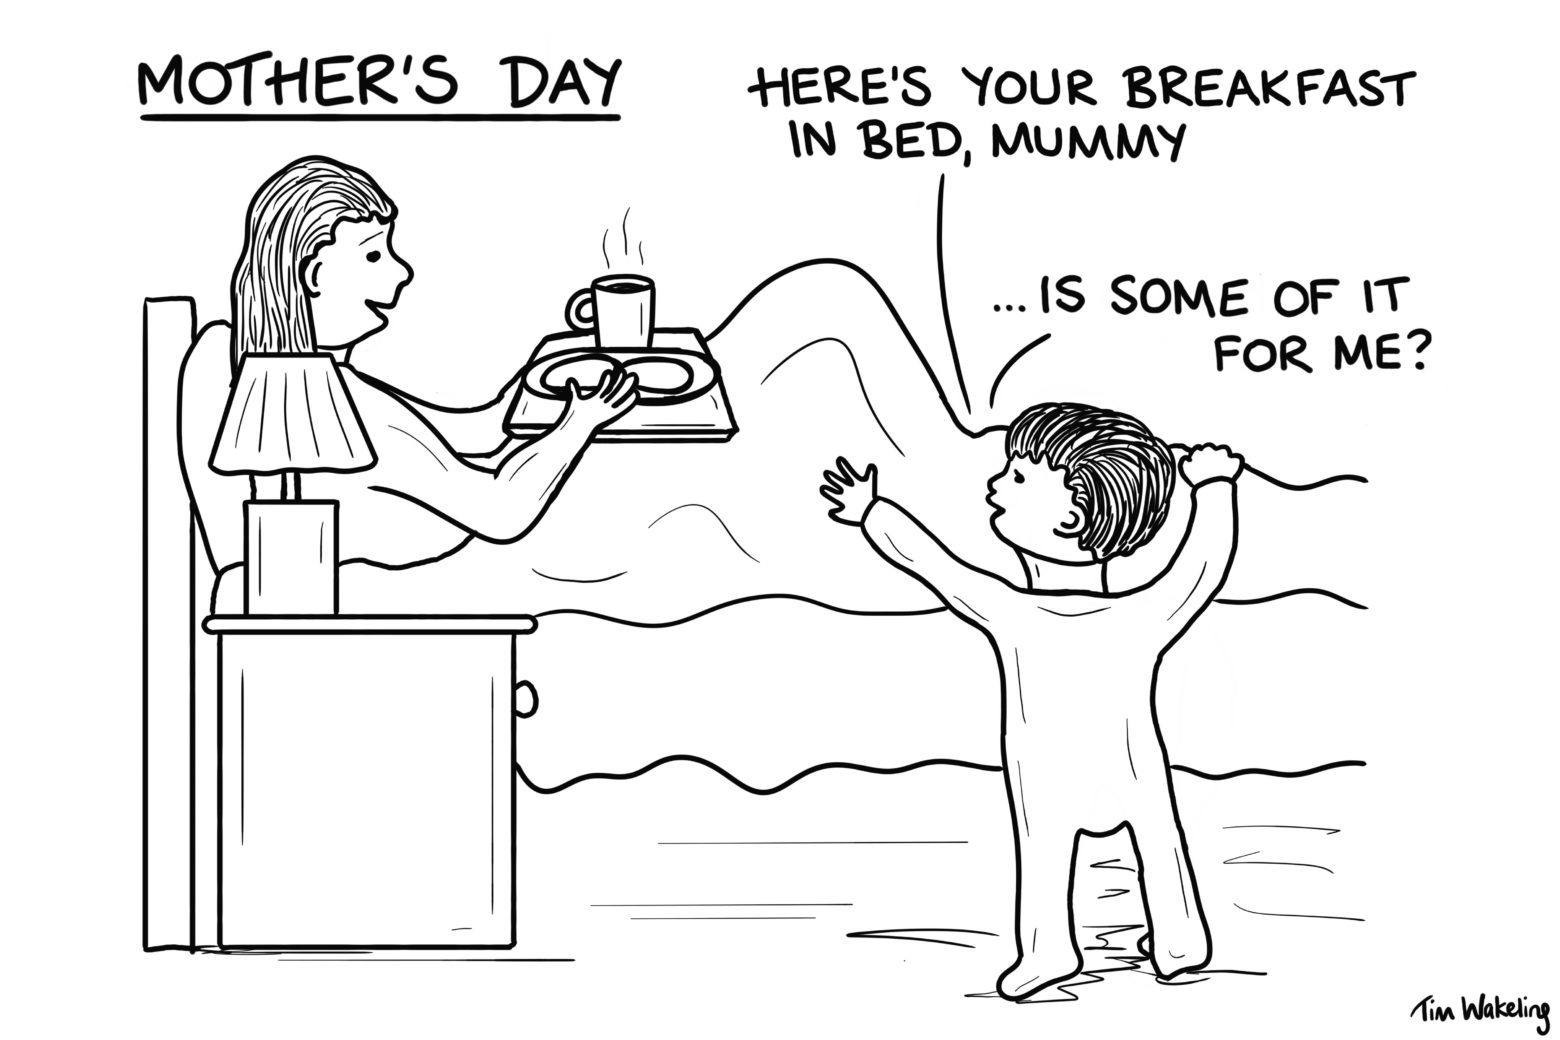 Mother’s Day breakfast